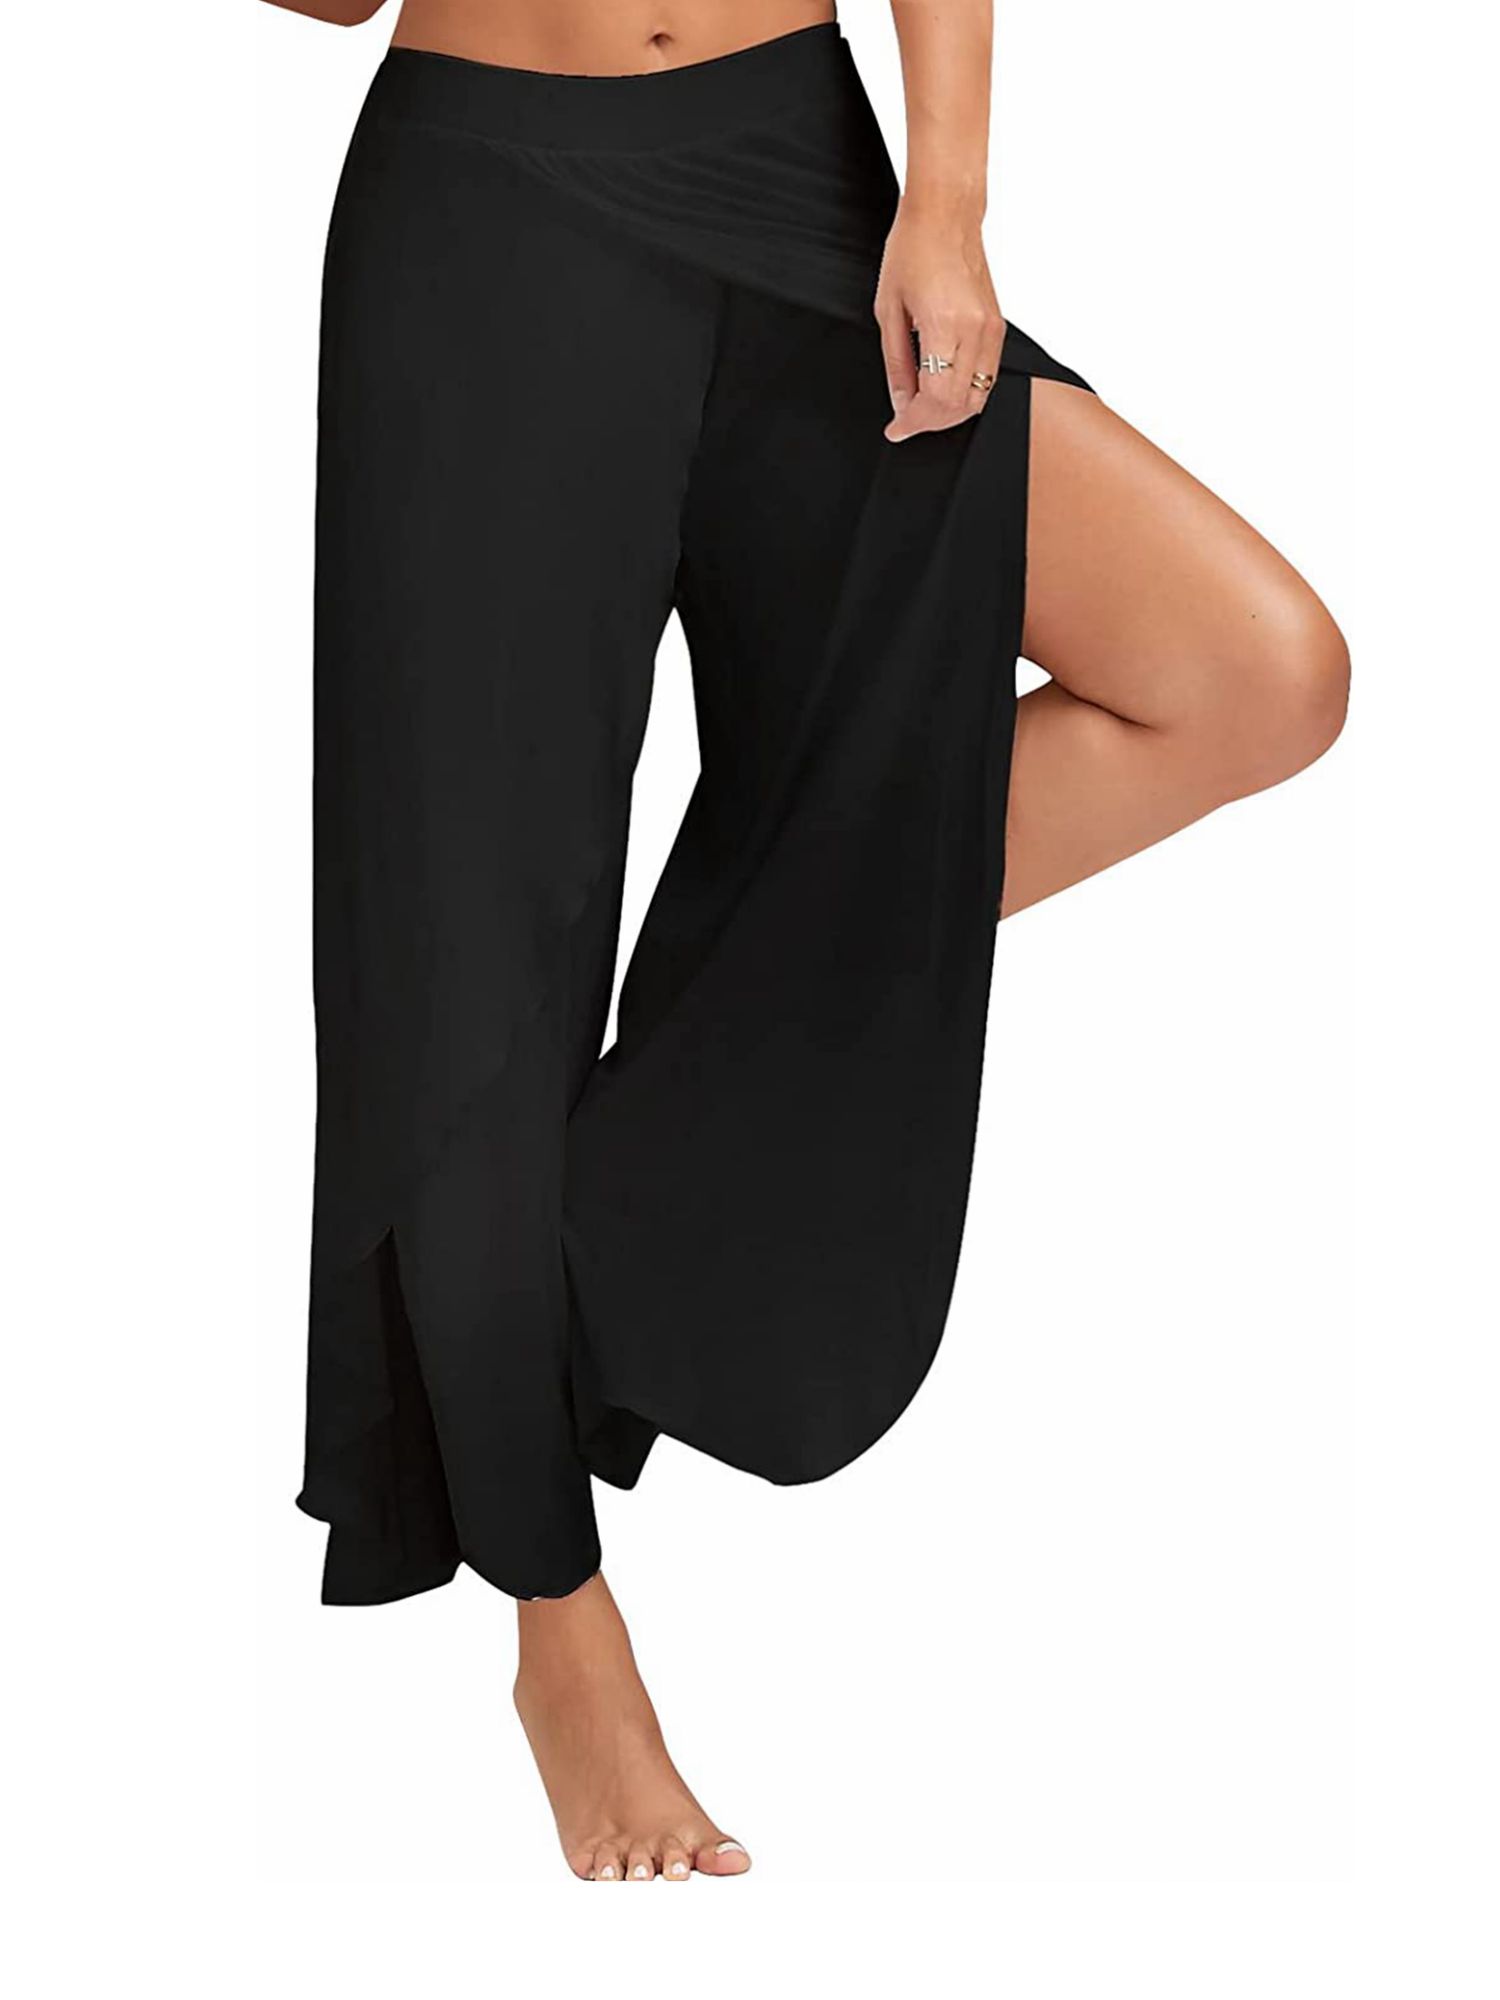 PMUYBHF Yoga Loose Pants for Women Women's Trousers Solid Color Spread Slit  High Waist Slim Wide Leg Casual Pants 4-Jul Wide Leg Pants for Women Plus  Size 